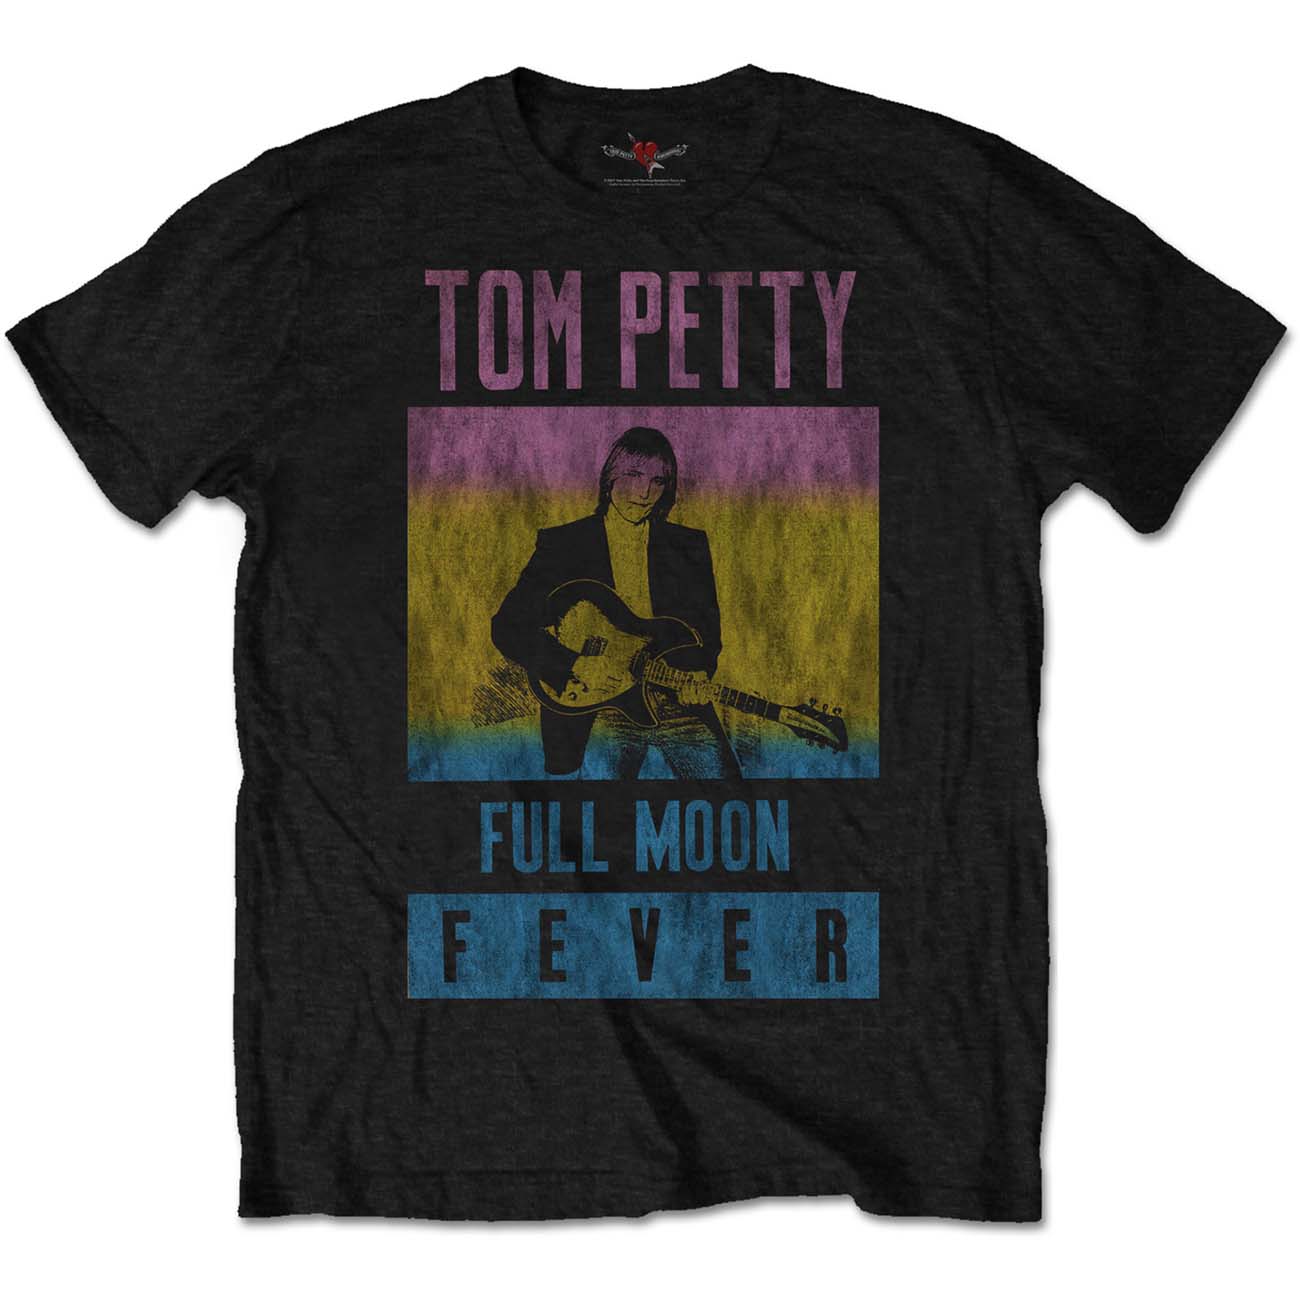 TOM PETTY AND THE HEARTBREAKERS Full Moon Fever